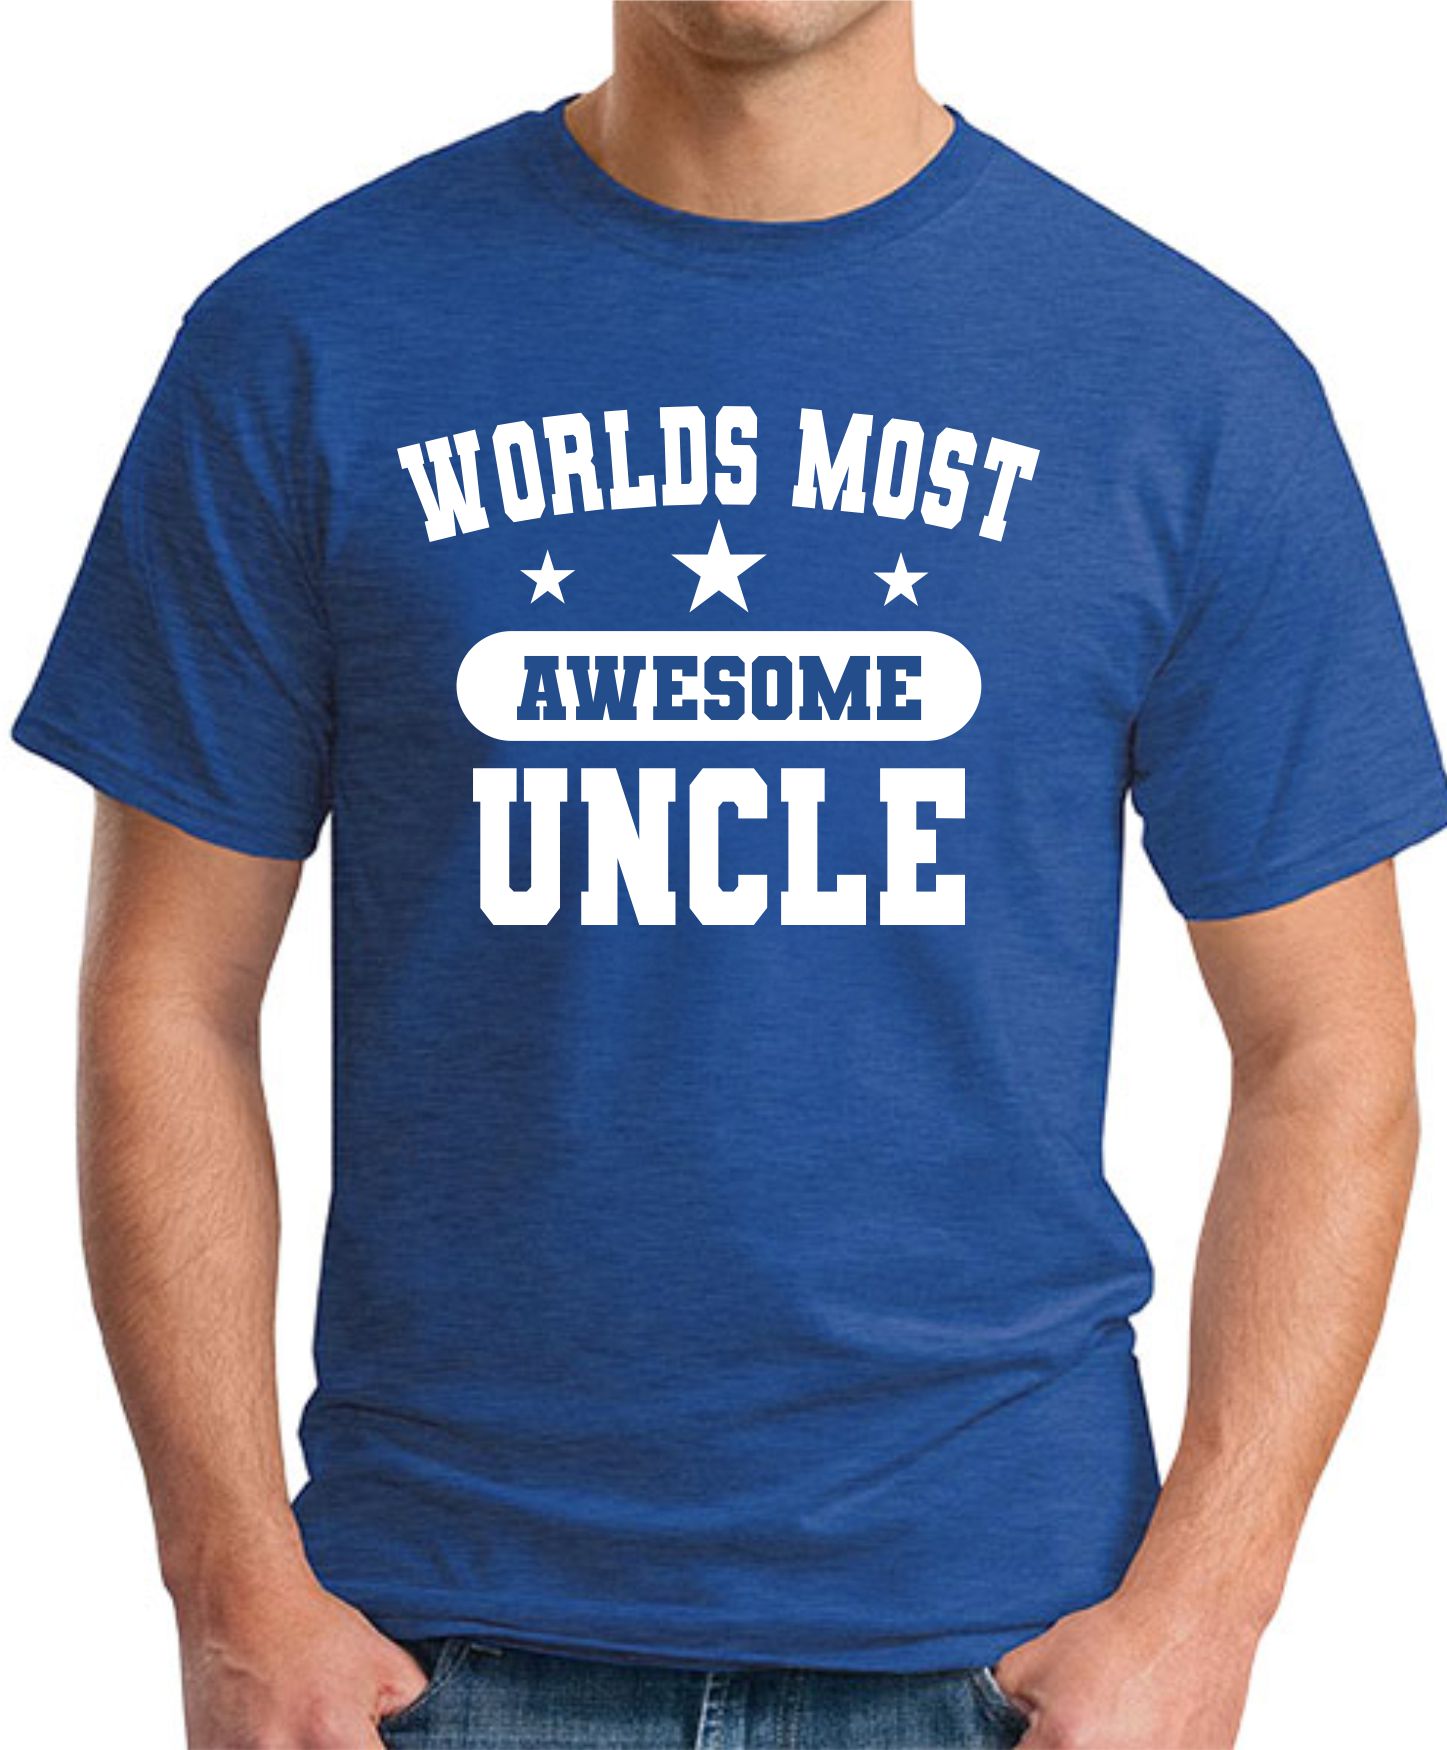 WORLDS MOST AWESOME UNCLE royal blue